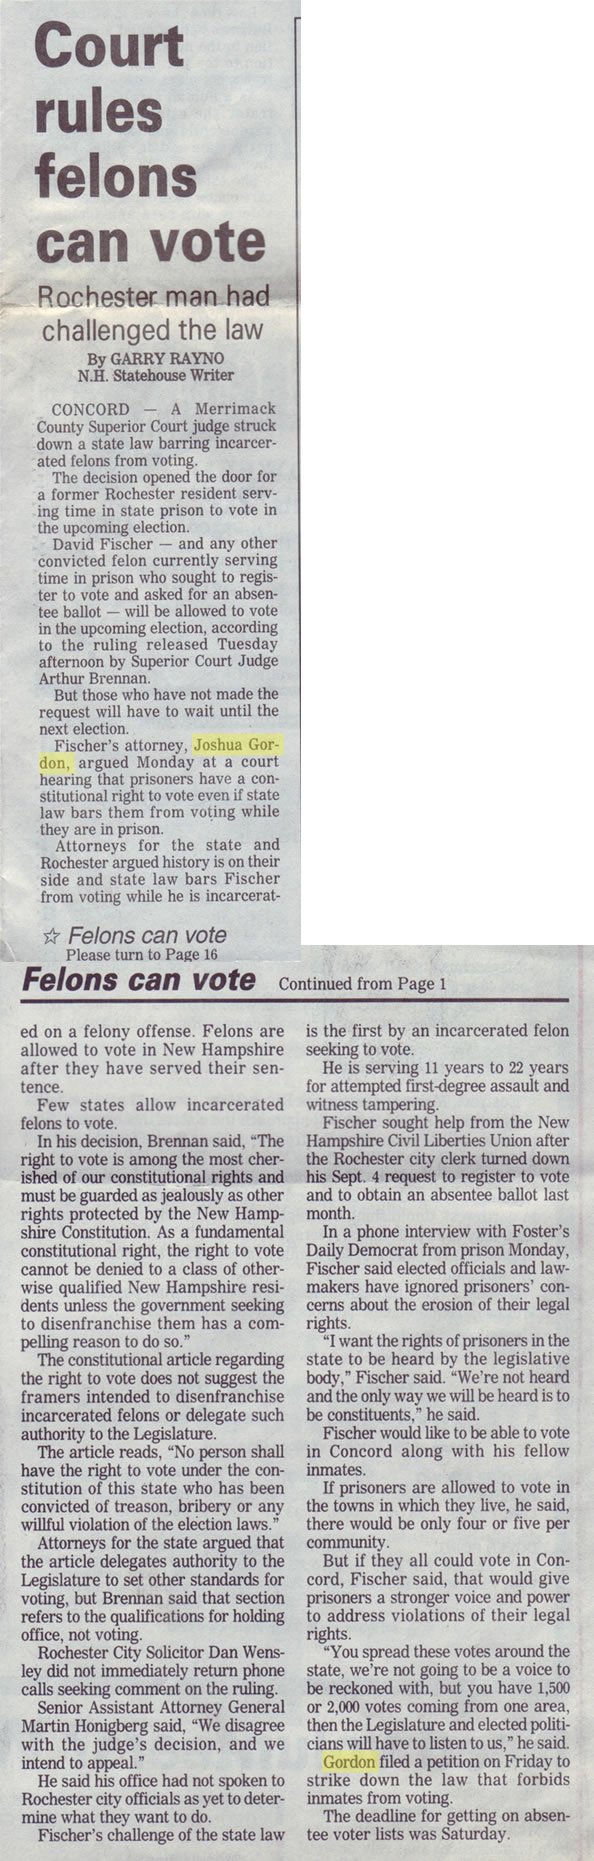 Court rules felons can vote